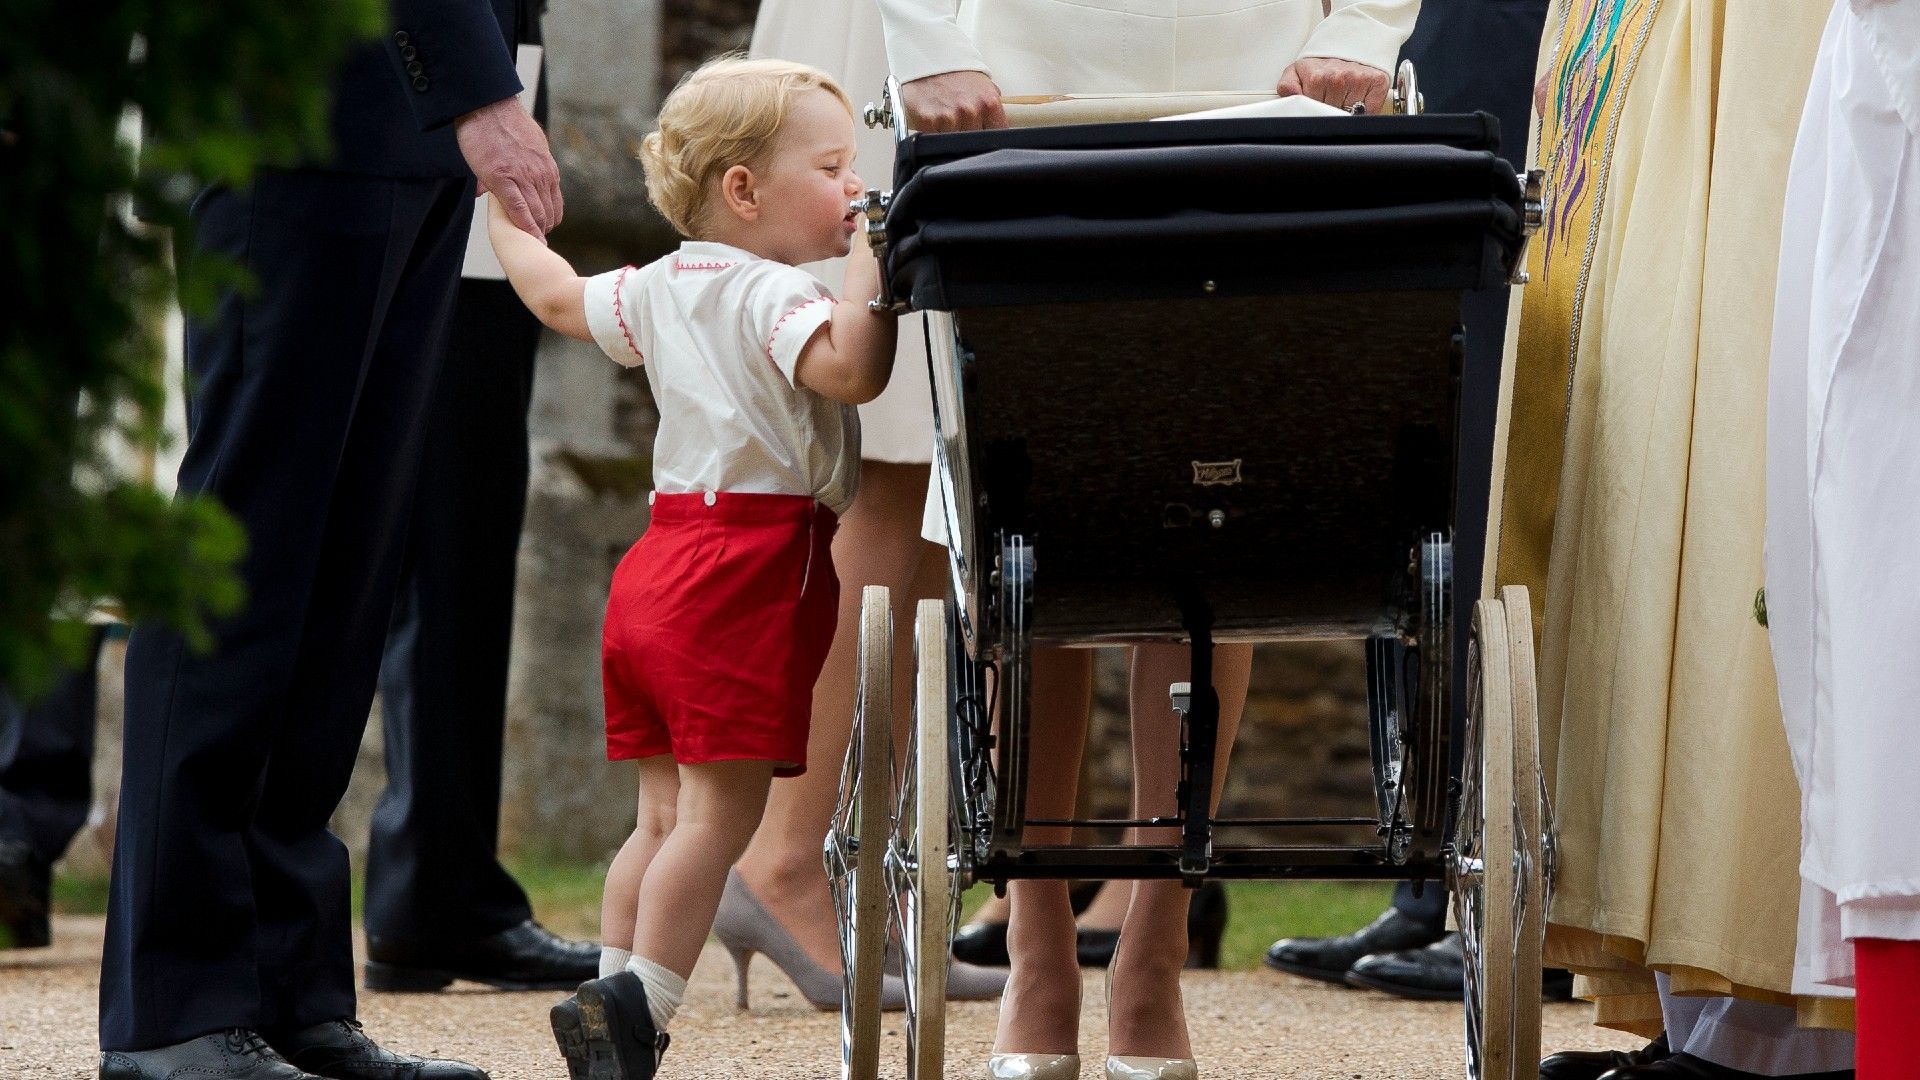 <p>                     This heart-warming photo might have been taken at the christening of Princess Charlotte, but it's George who stole hearts with his adorable, instinctive big brotherly nature shining through.                   </p>                                      <p>                     Having to stand on his tiptoes, the young Prince keeps a watchful eye over his younger sister as she is pushed around in her pram.                   </p>